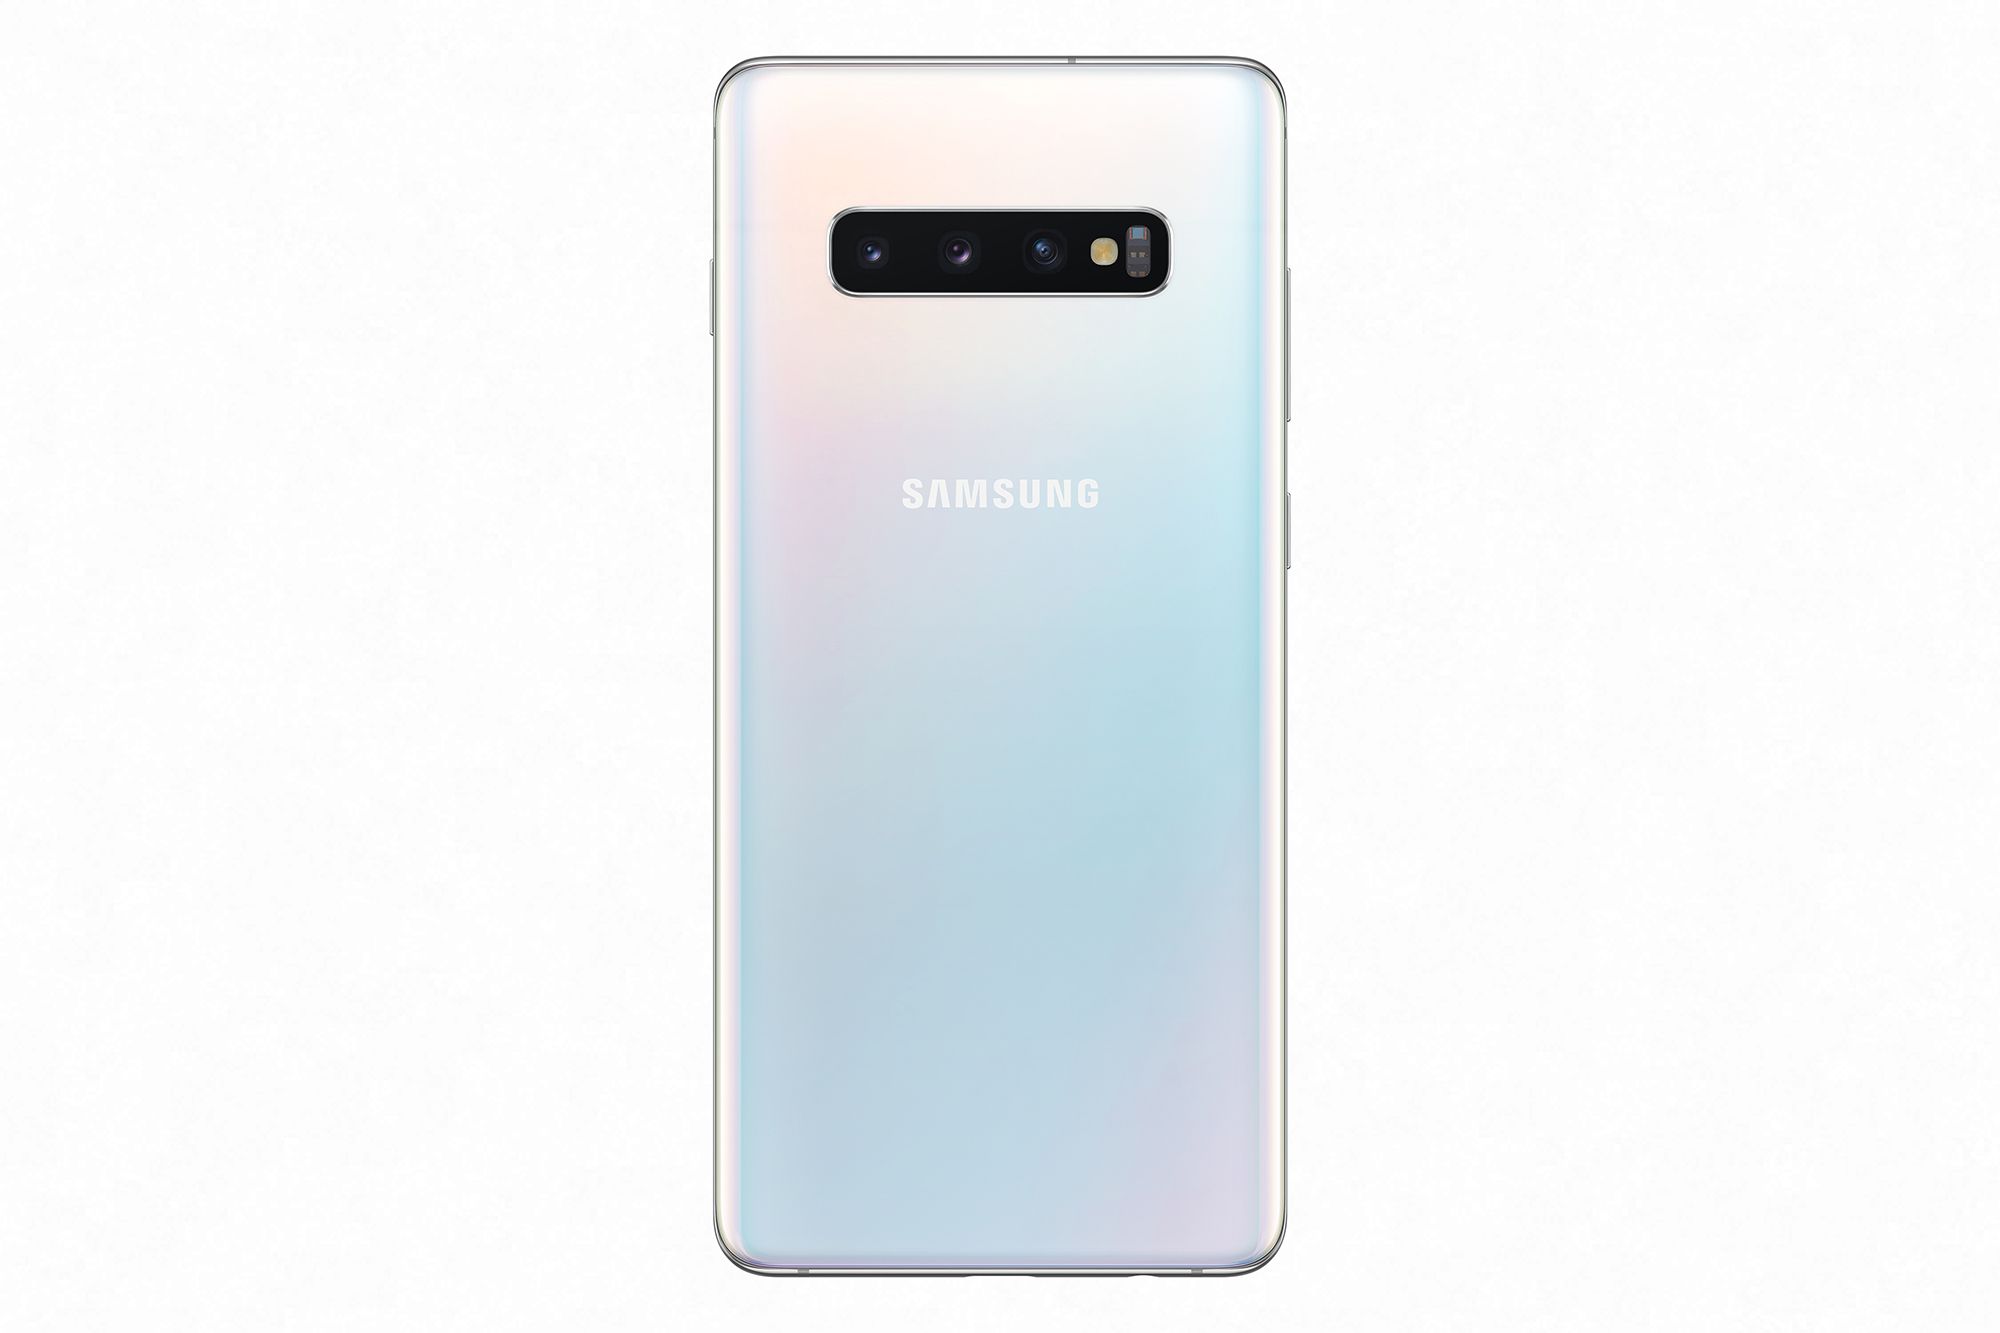 Samsung Galaxy S10, S10+, S10e Model Numbers and Variants 1